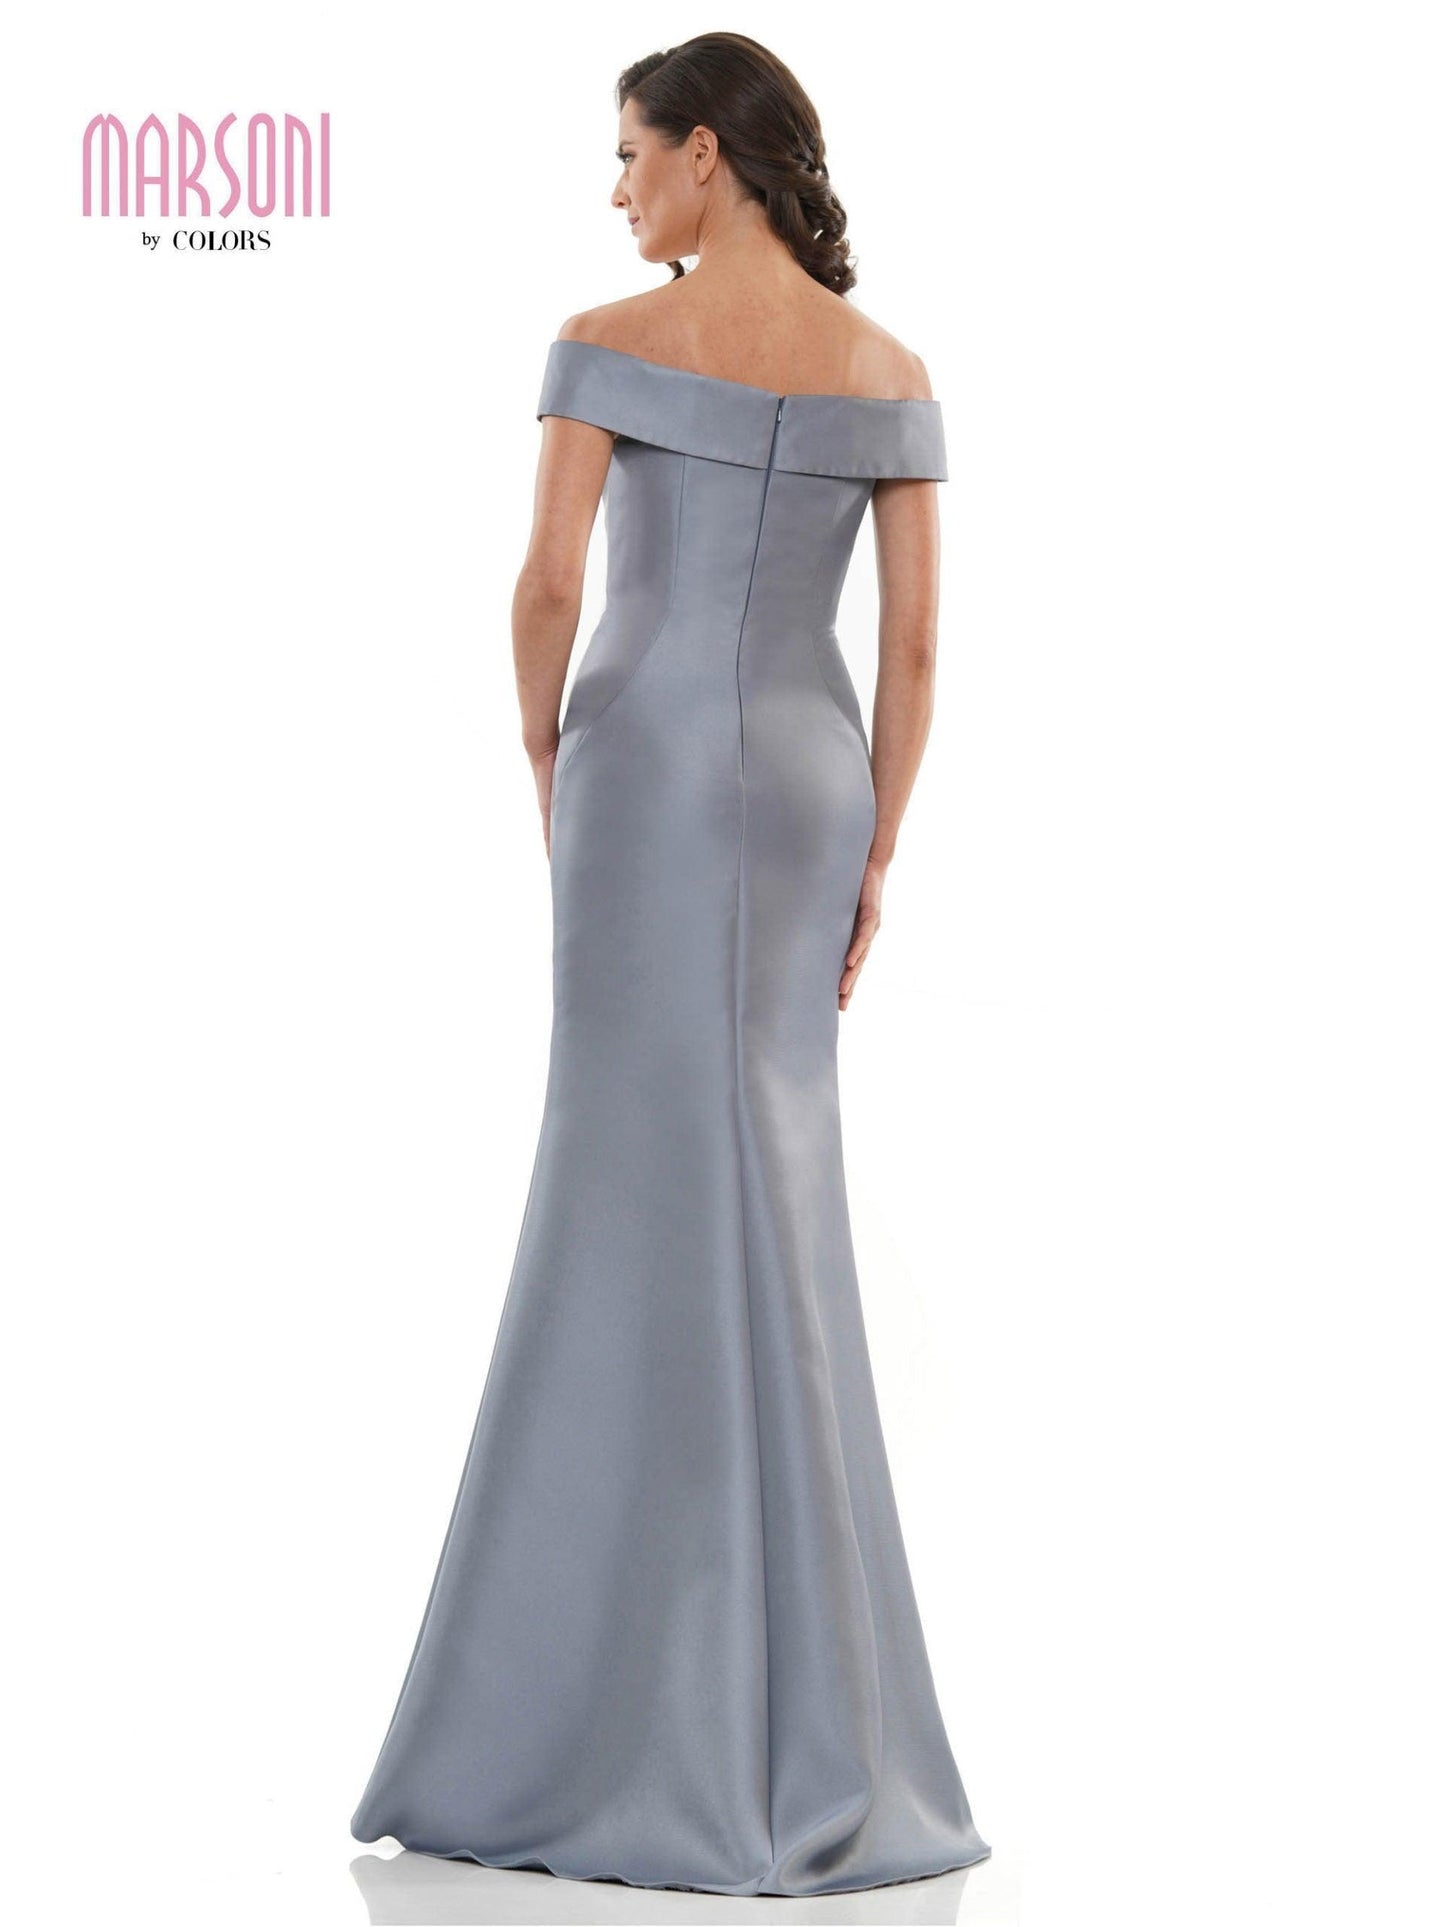 Marsoni Mother of the Bride Long Satin Dress 1003 - The Dress Outlet